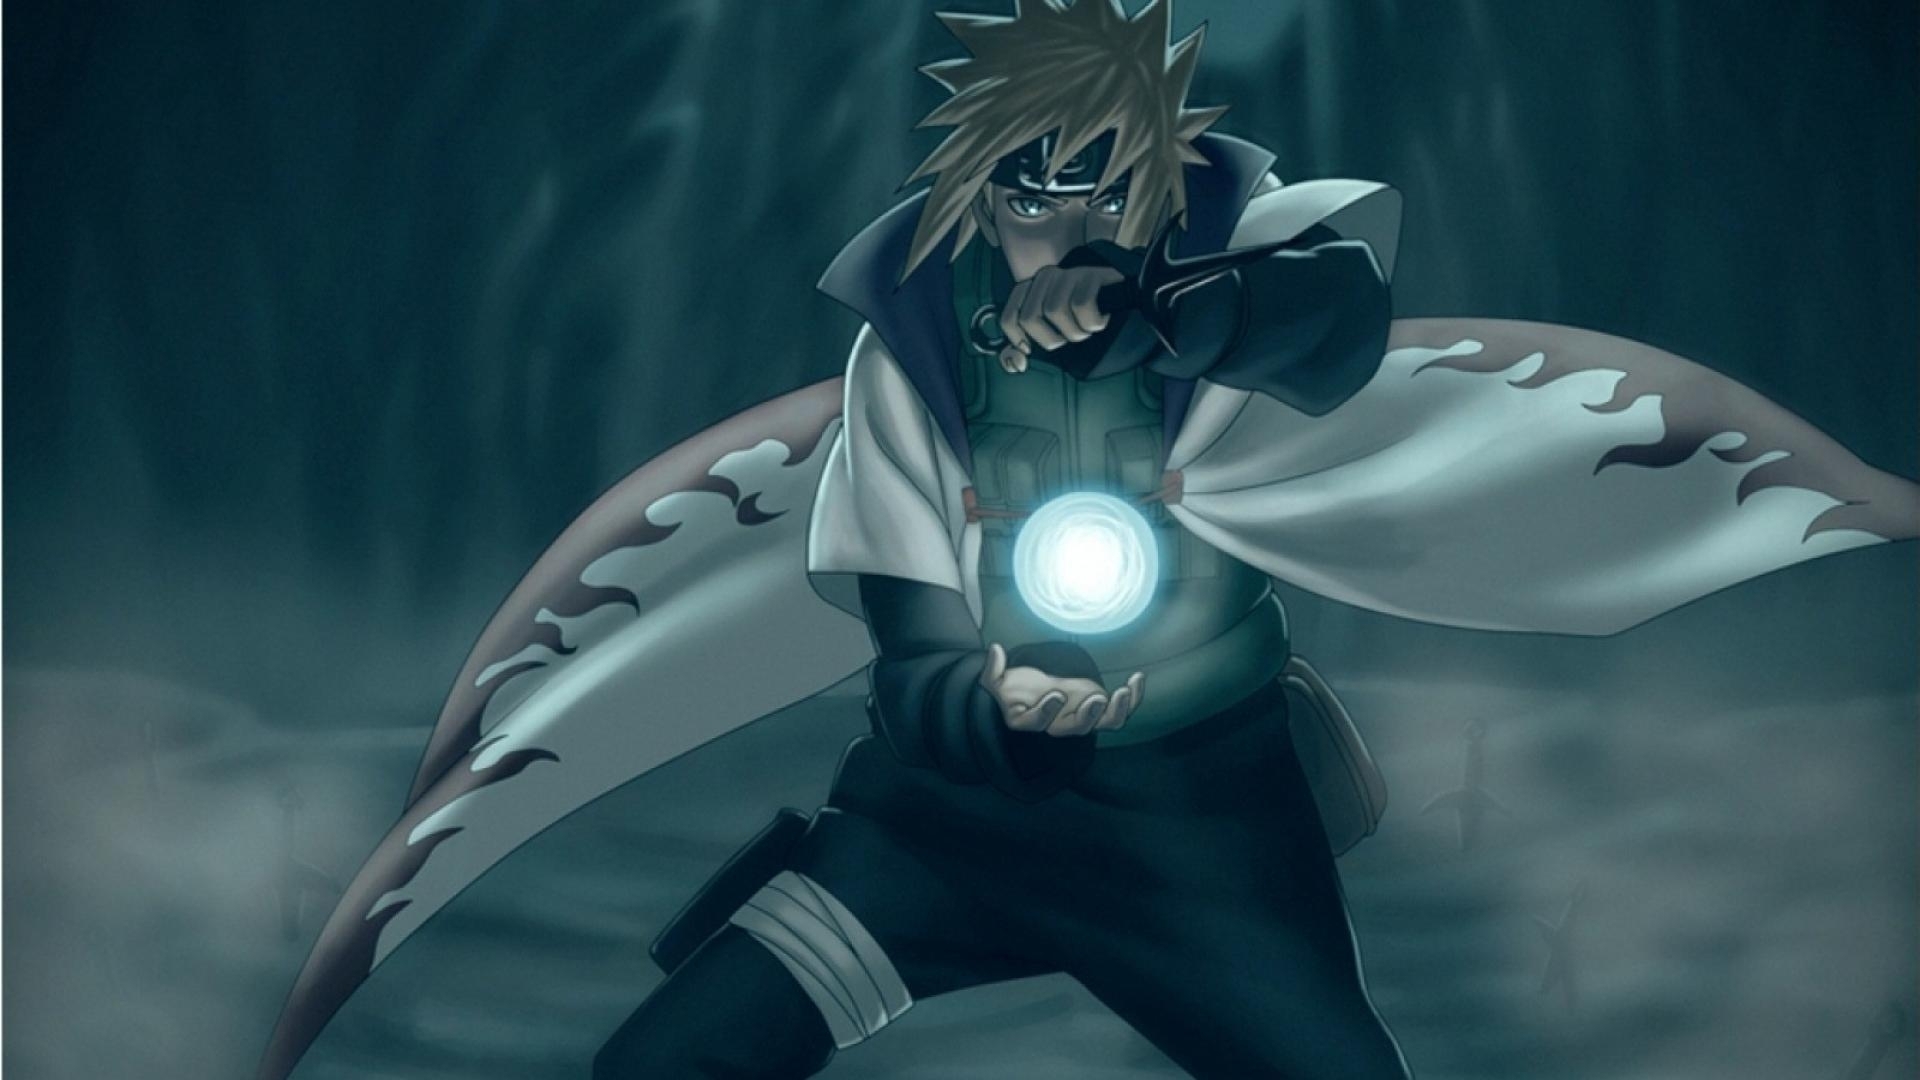 10 Best Naruto Shippuden Hd Wallpapers FULL HD 1080p For ...